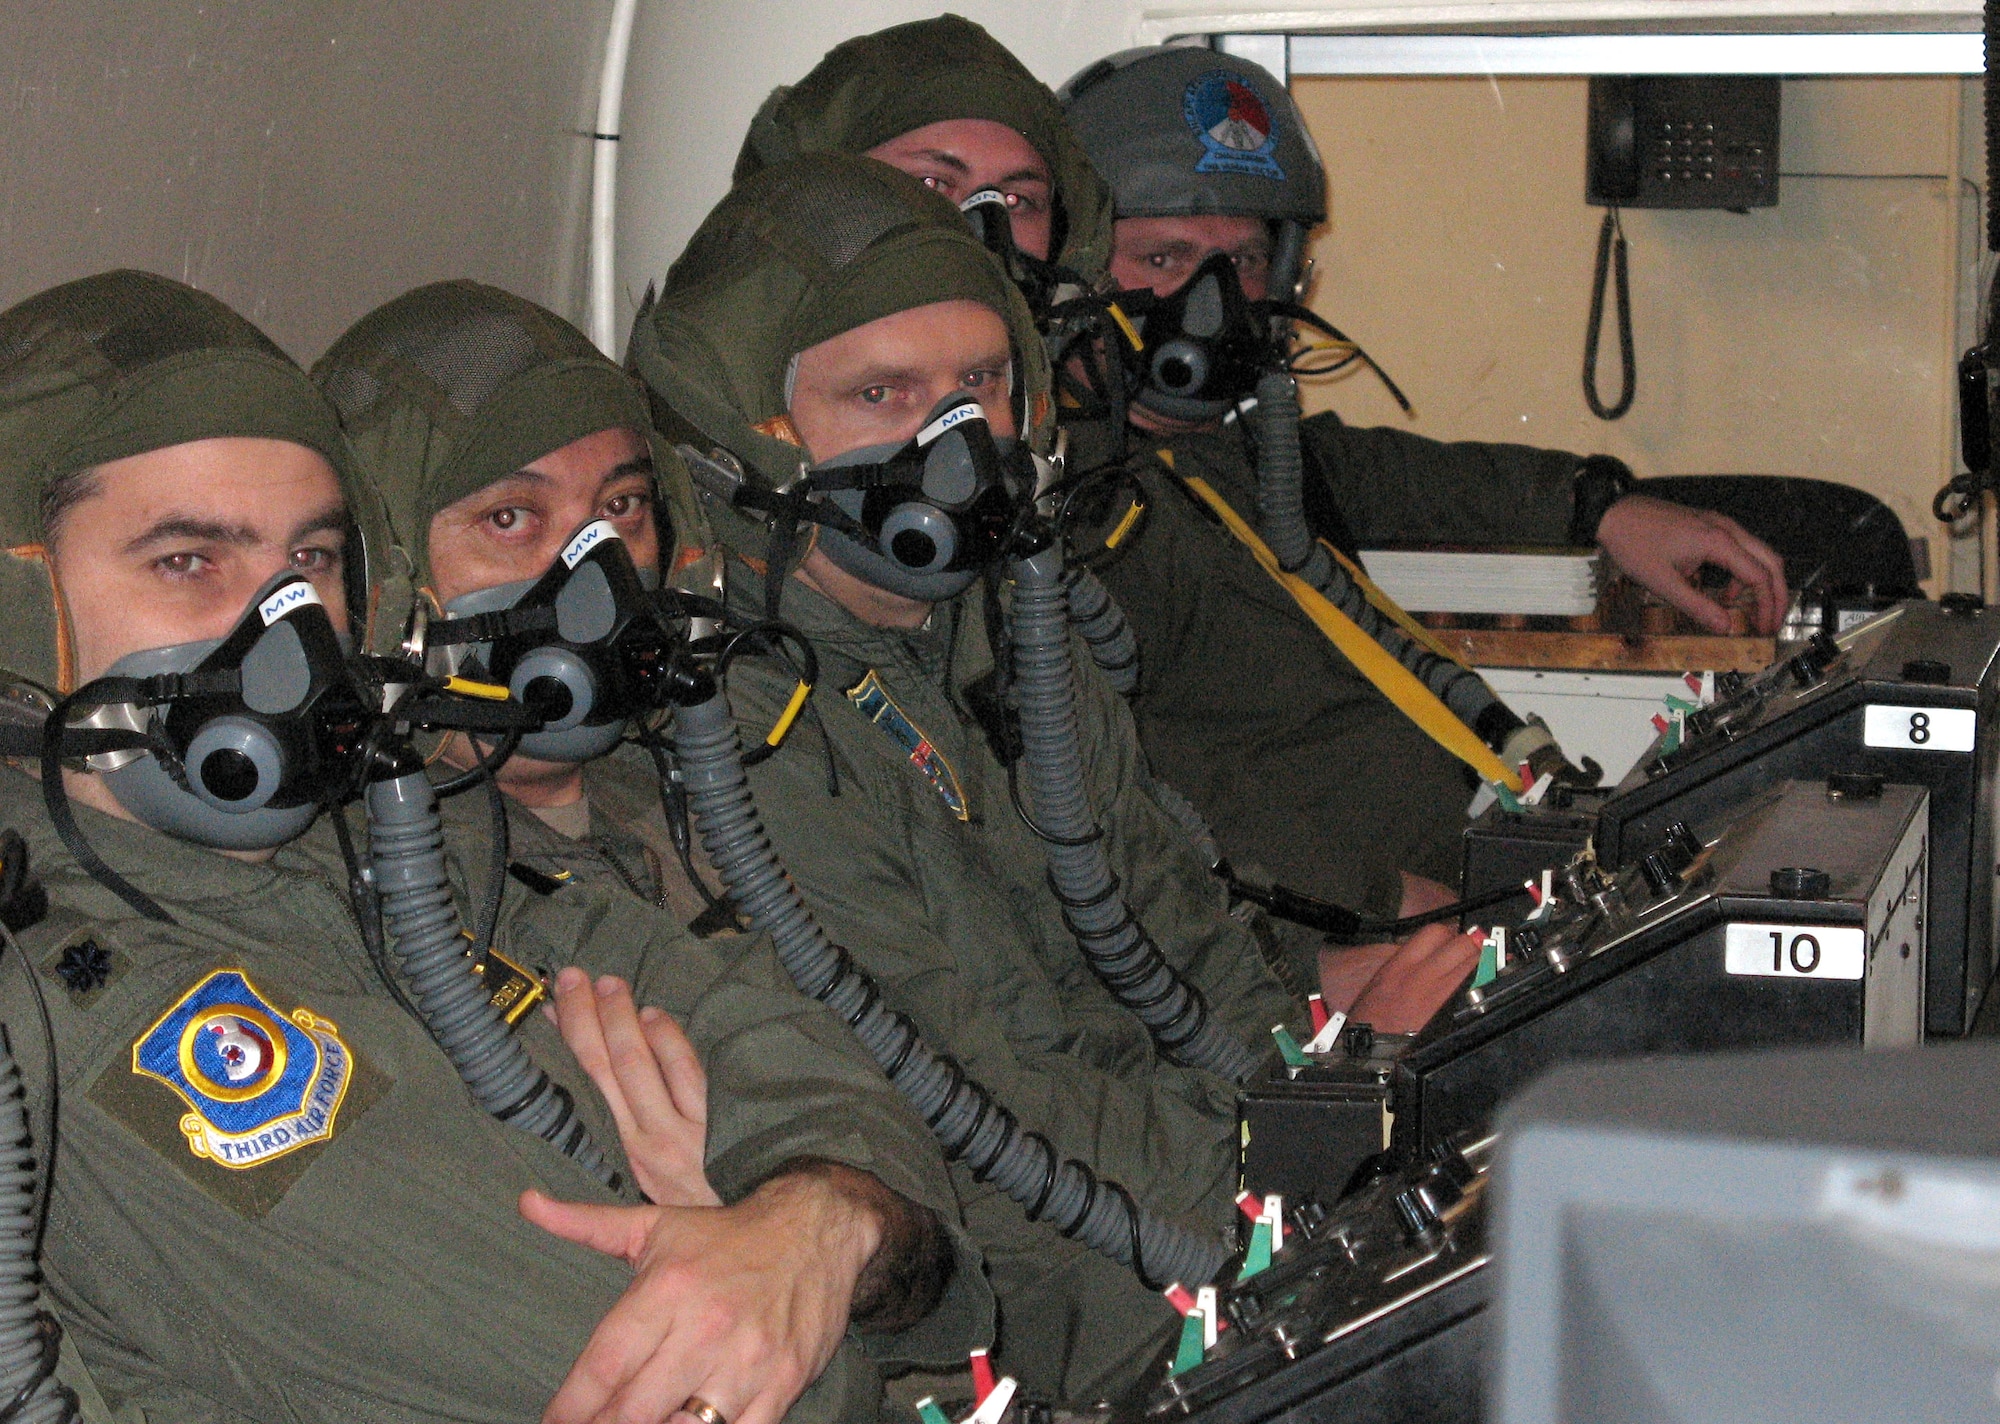 Students look on during a pre-flight brief in the high-altitude training chamber Feb. 7 at the Center for Man and Aviation in the Netherlands. The chamber simulates altitudes up to 30,000 feet and allows students to see firsthand the effects of hypoxia. (U.S. Air Force photo/Staff Sgt. Leigh Bellinger) 